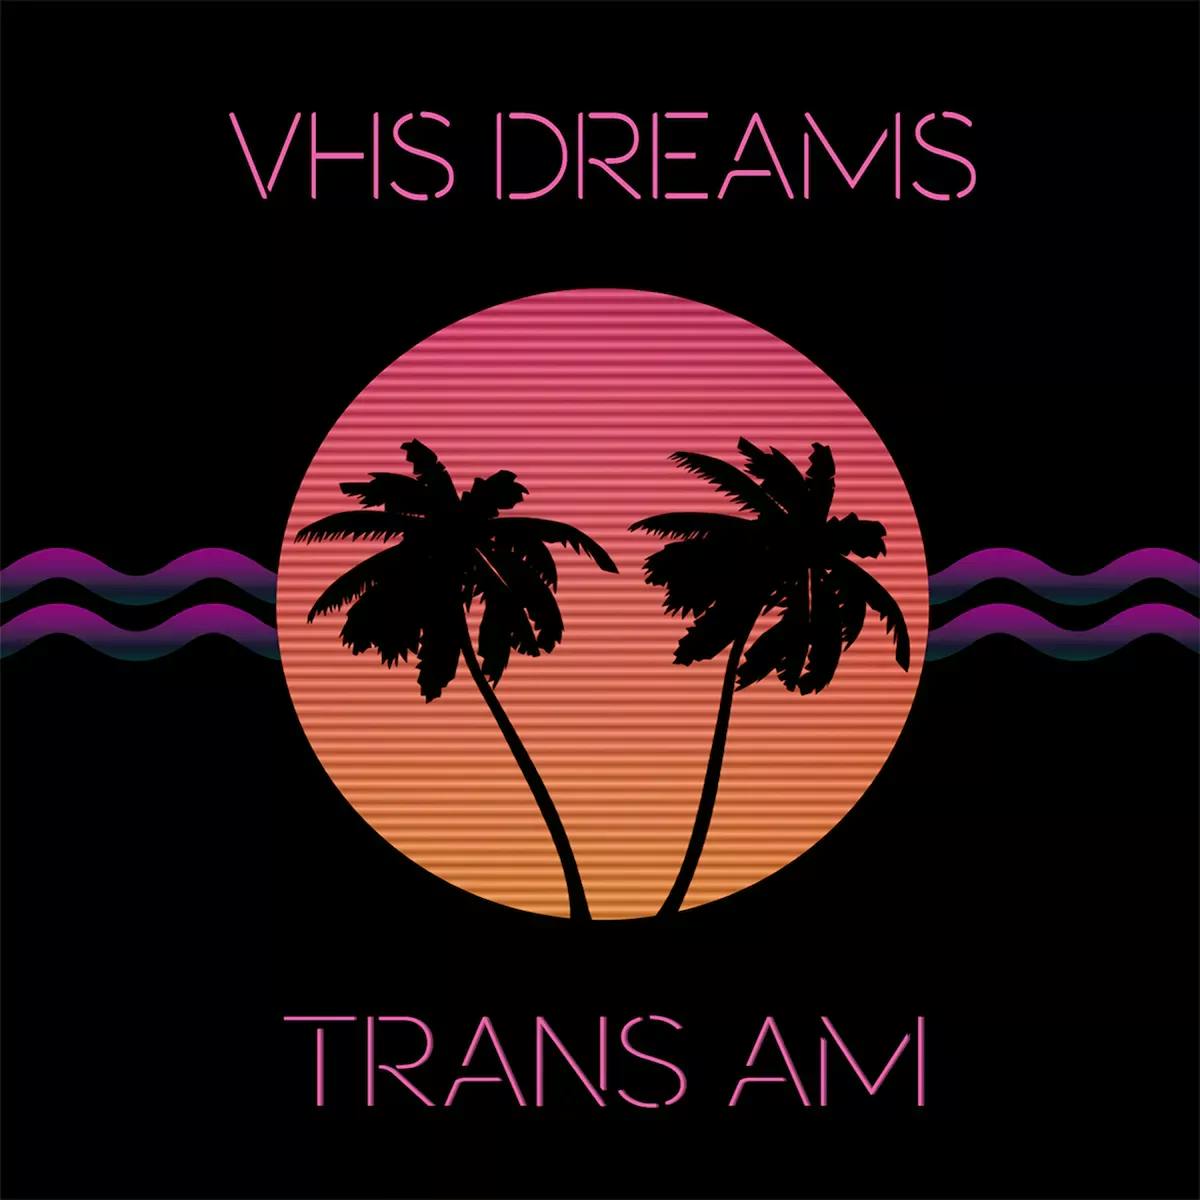 Tropical background with text "VHS Dreams Trans AM"